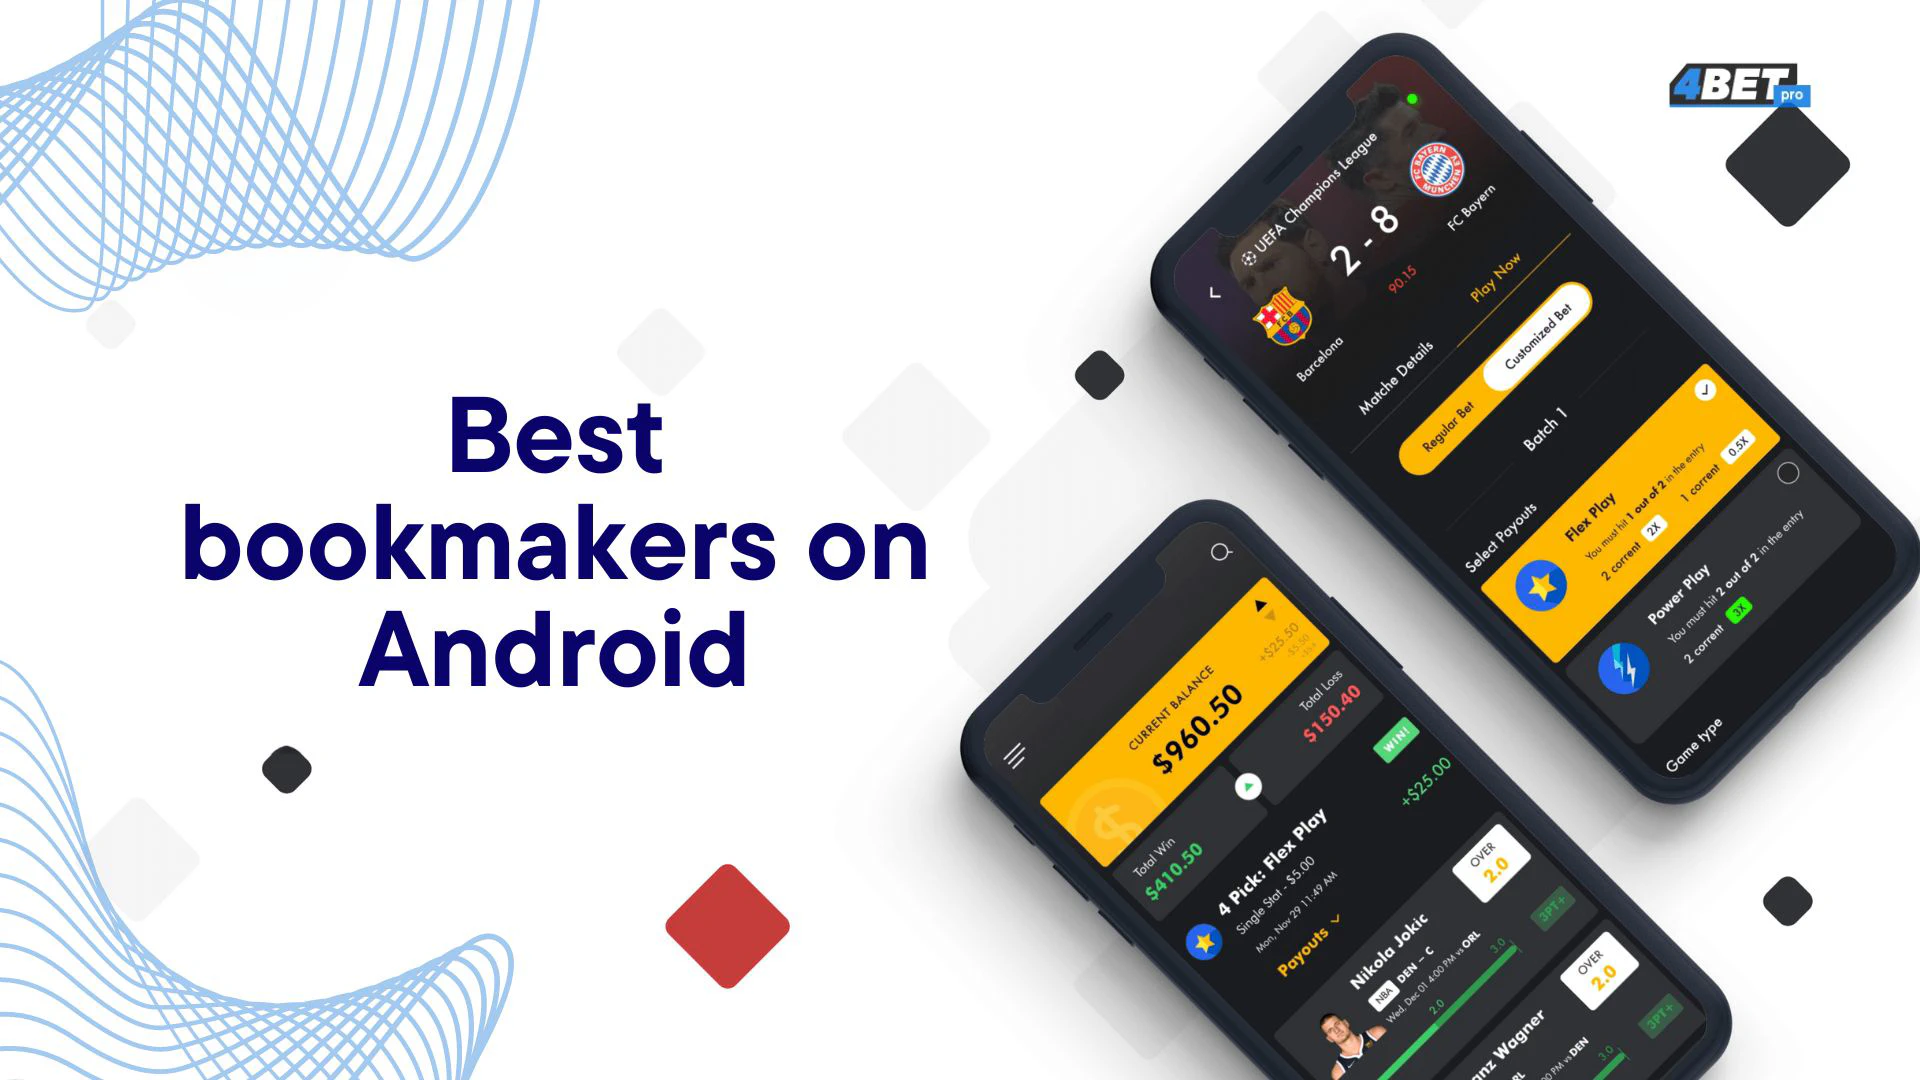 Bookmaker apps for Android